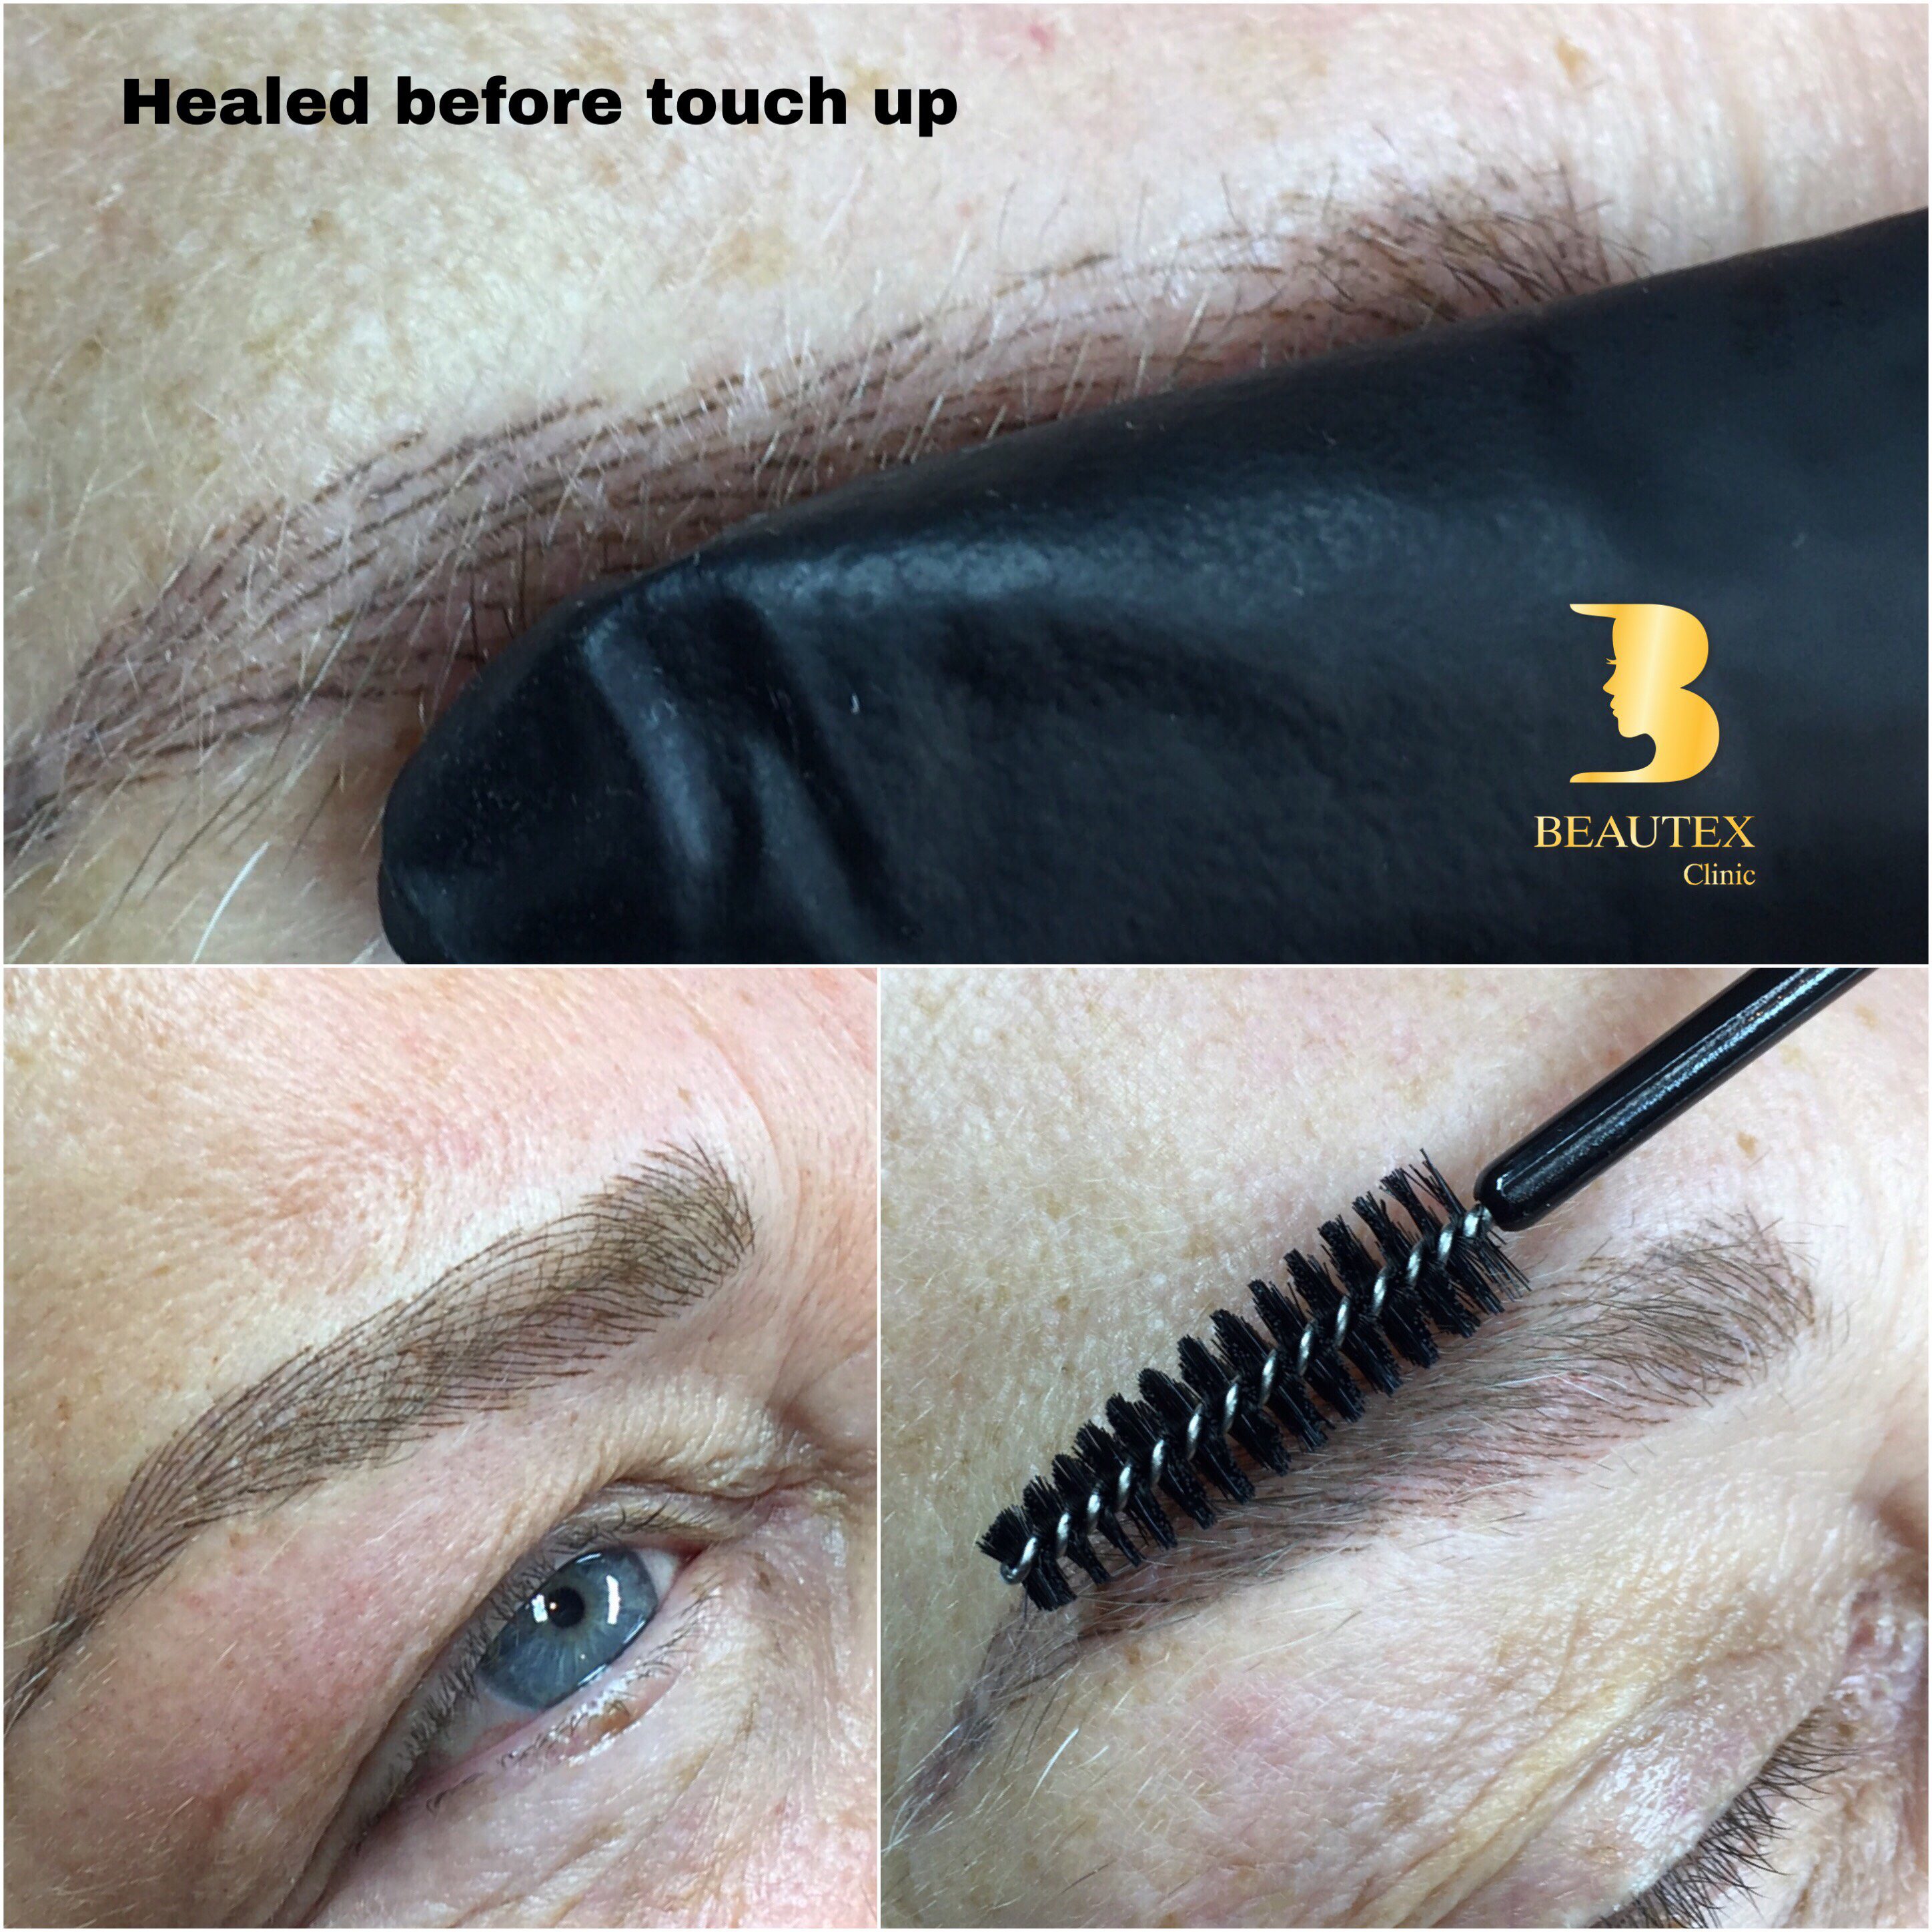 A woman's eyebrows before and after a touch up.